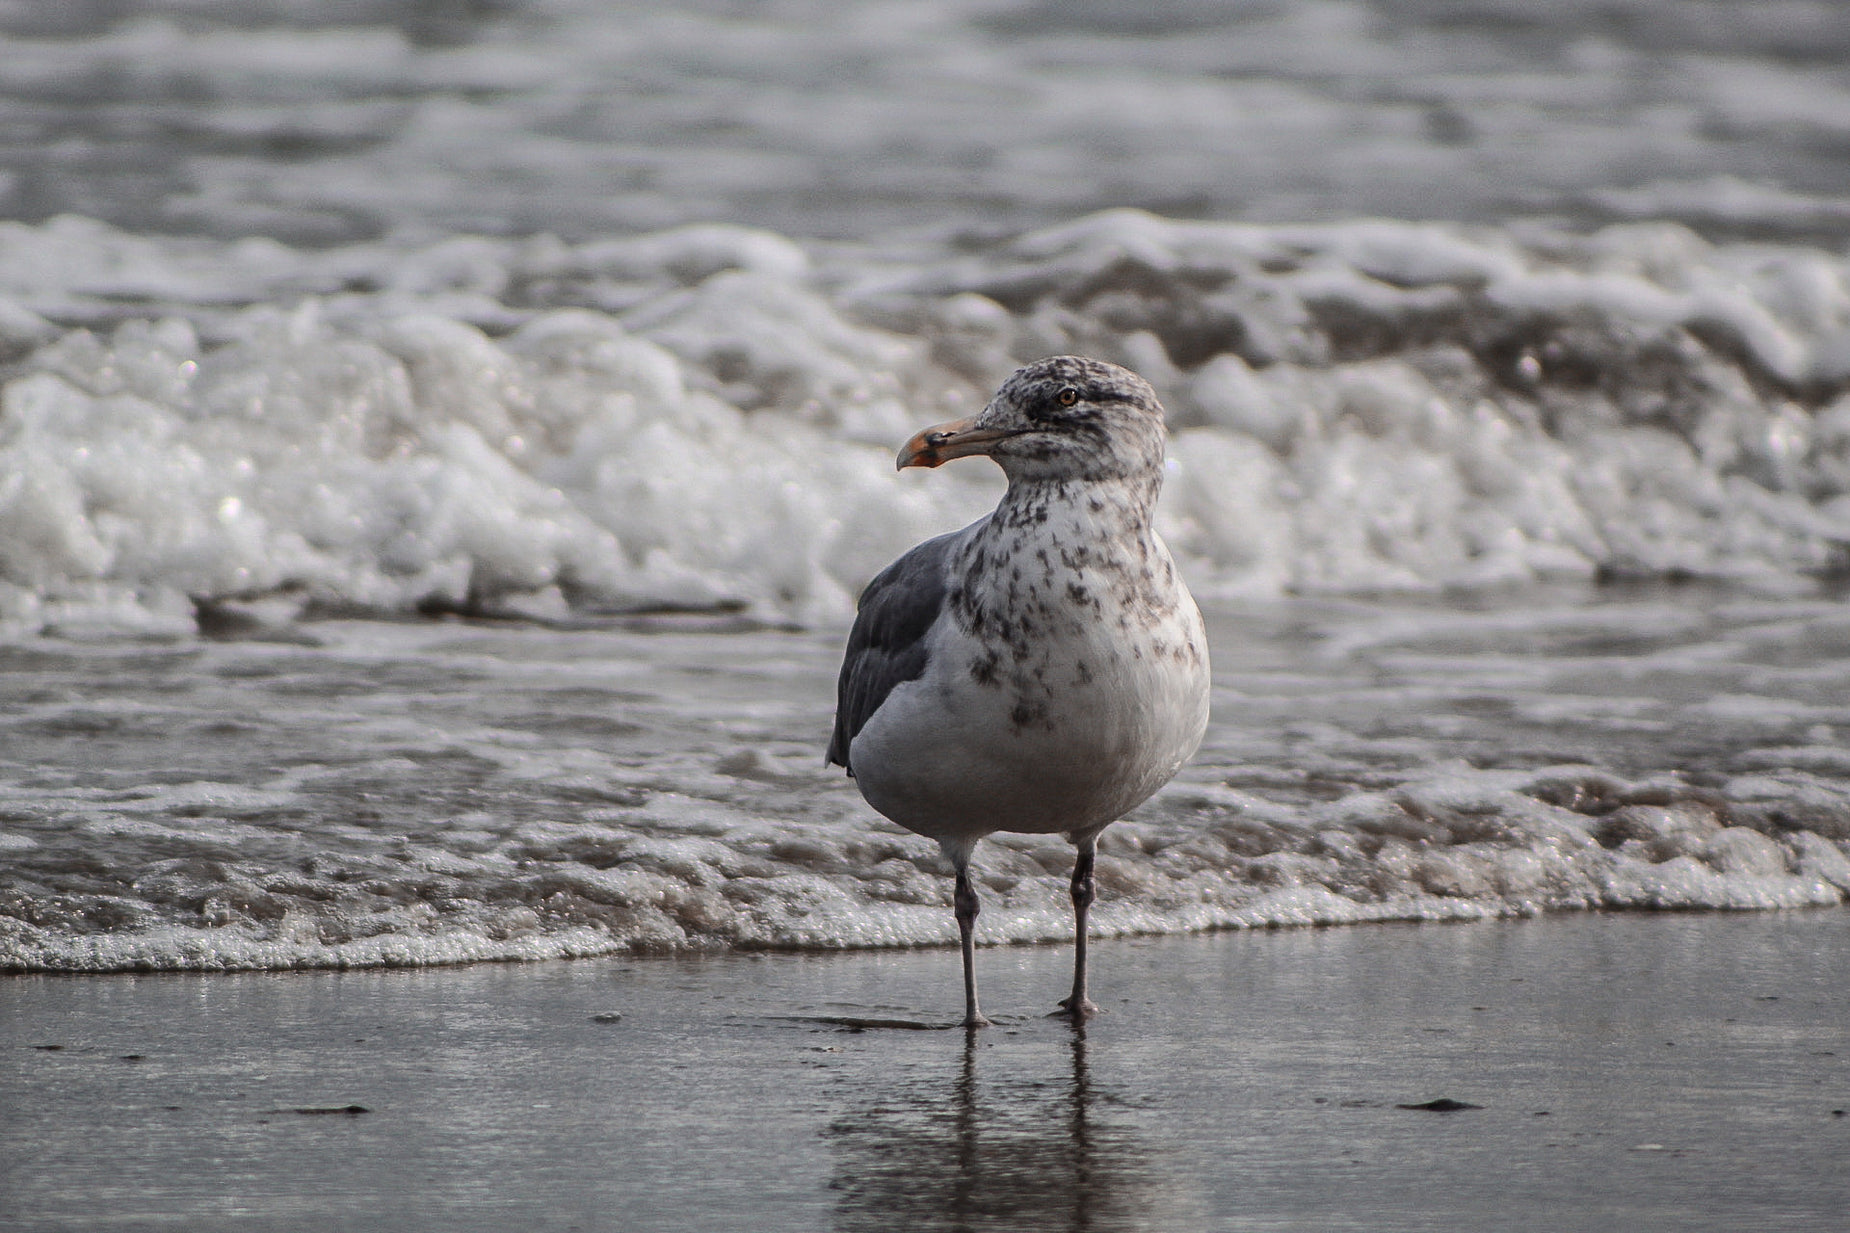 a bird standing on the sand near the water